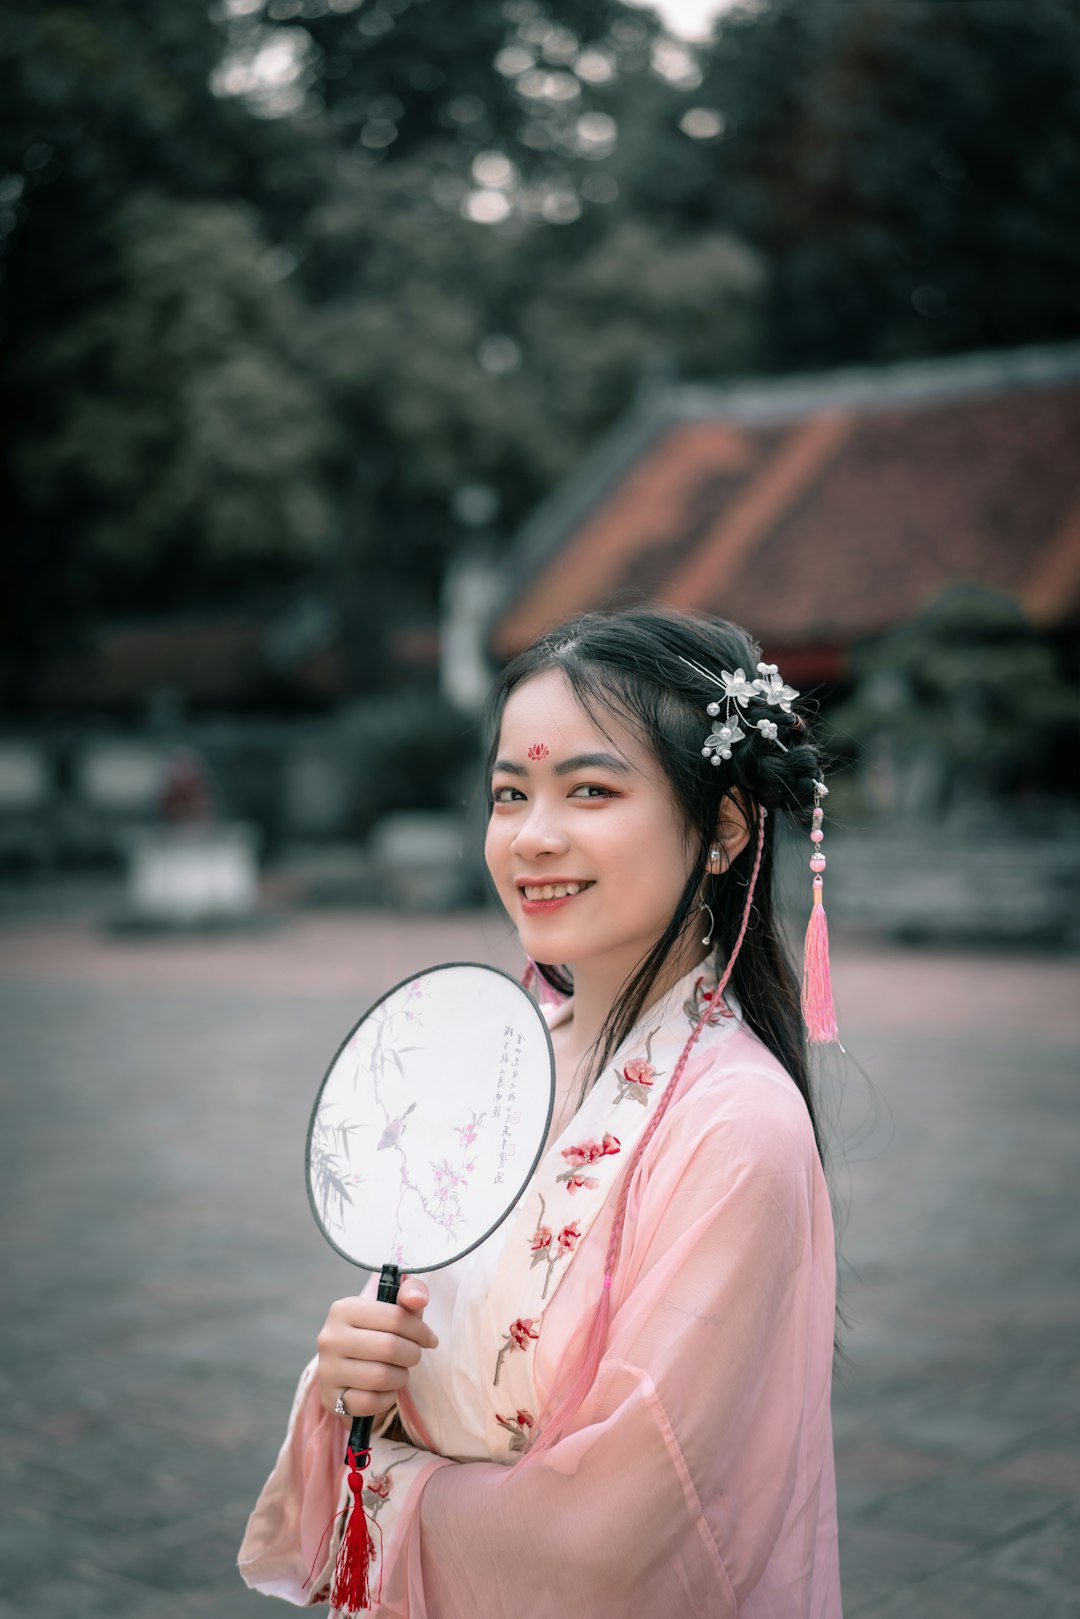 woman in pink shirt holding white hand fan